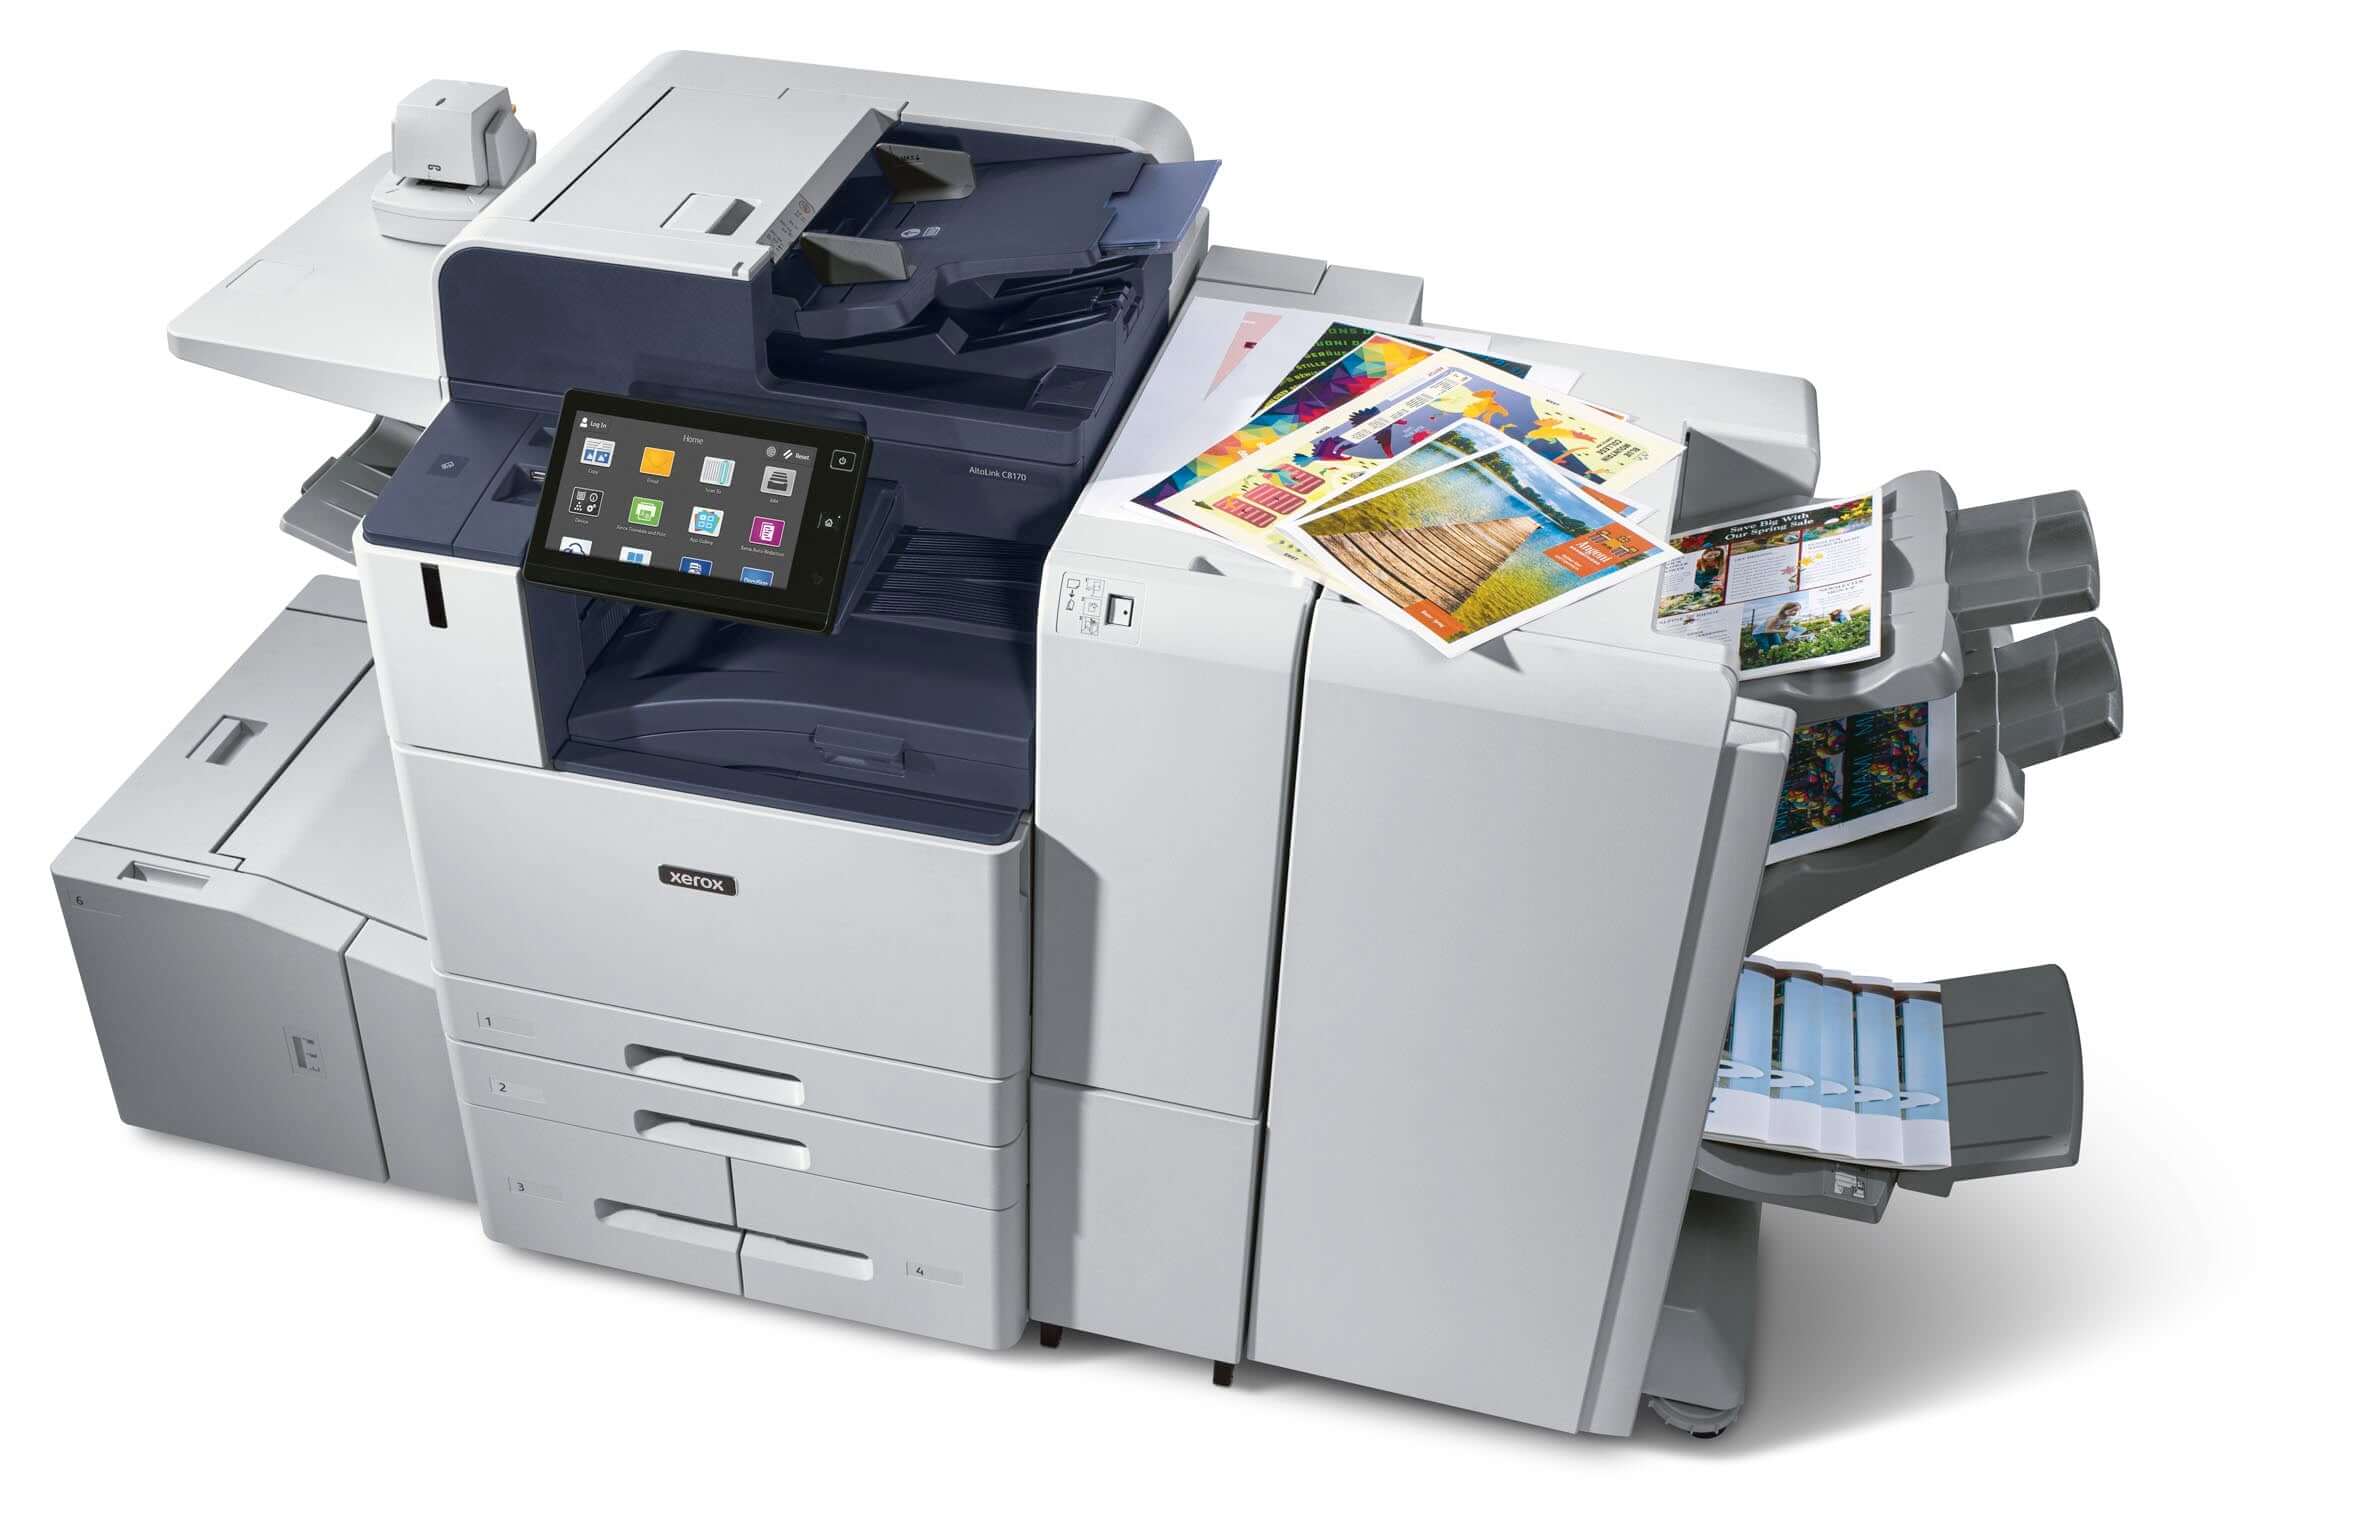 Xerox AltaLink C8170 A3 Colour Multi-Function Printer - 3,140 Paper Supply